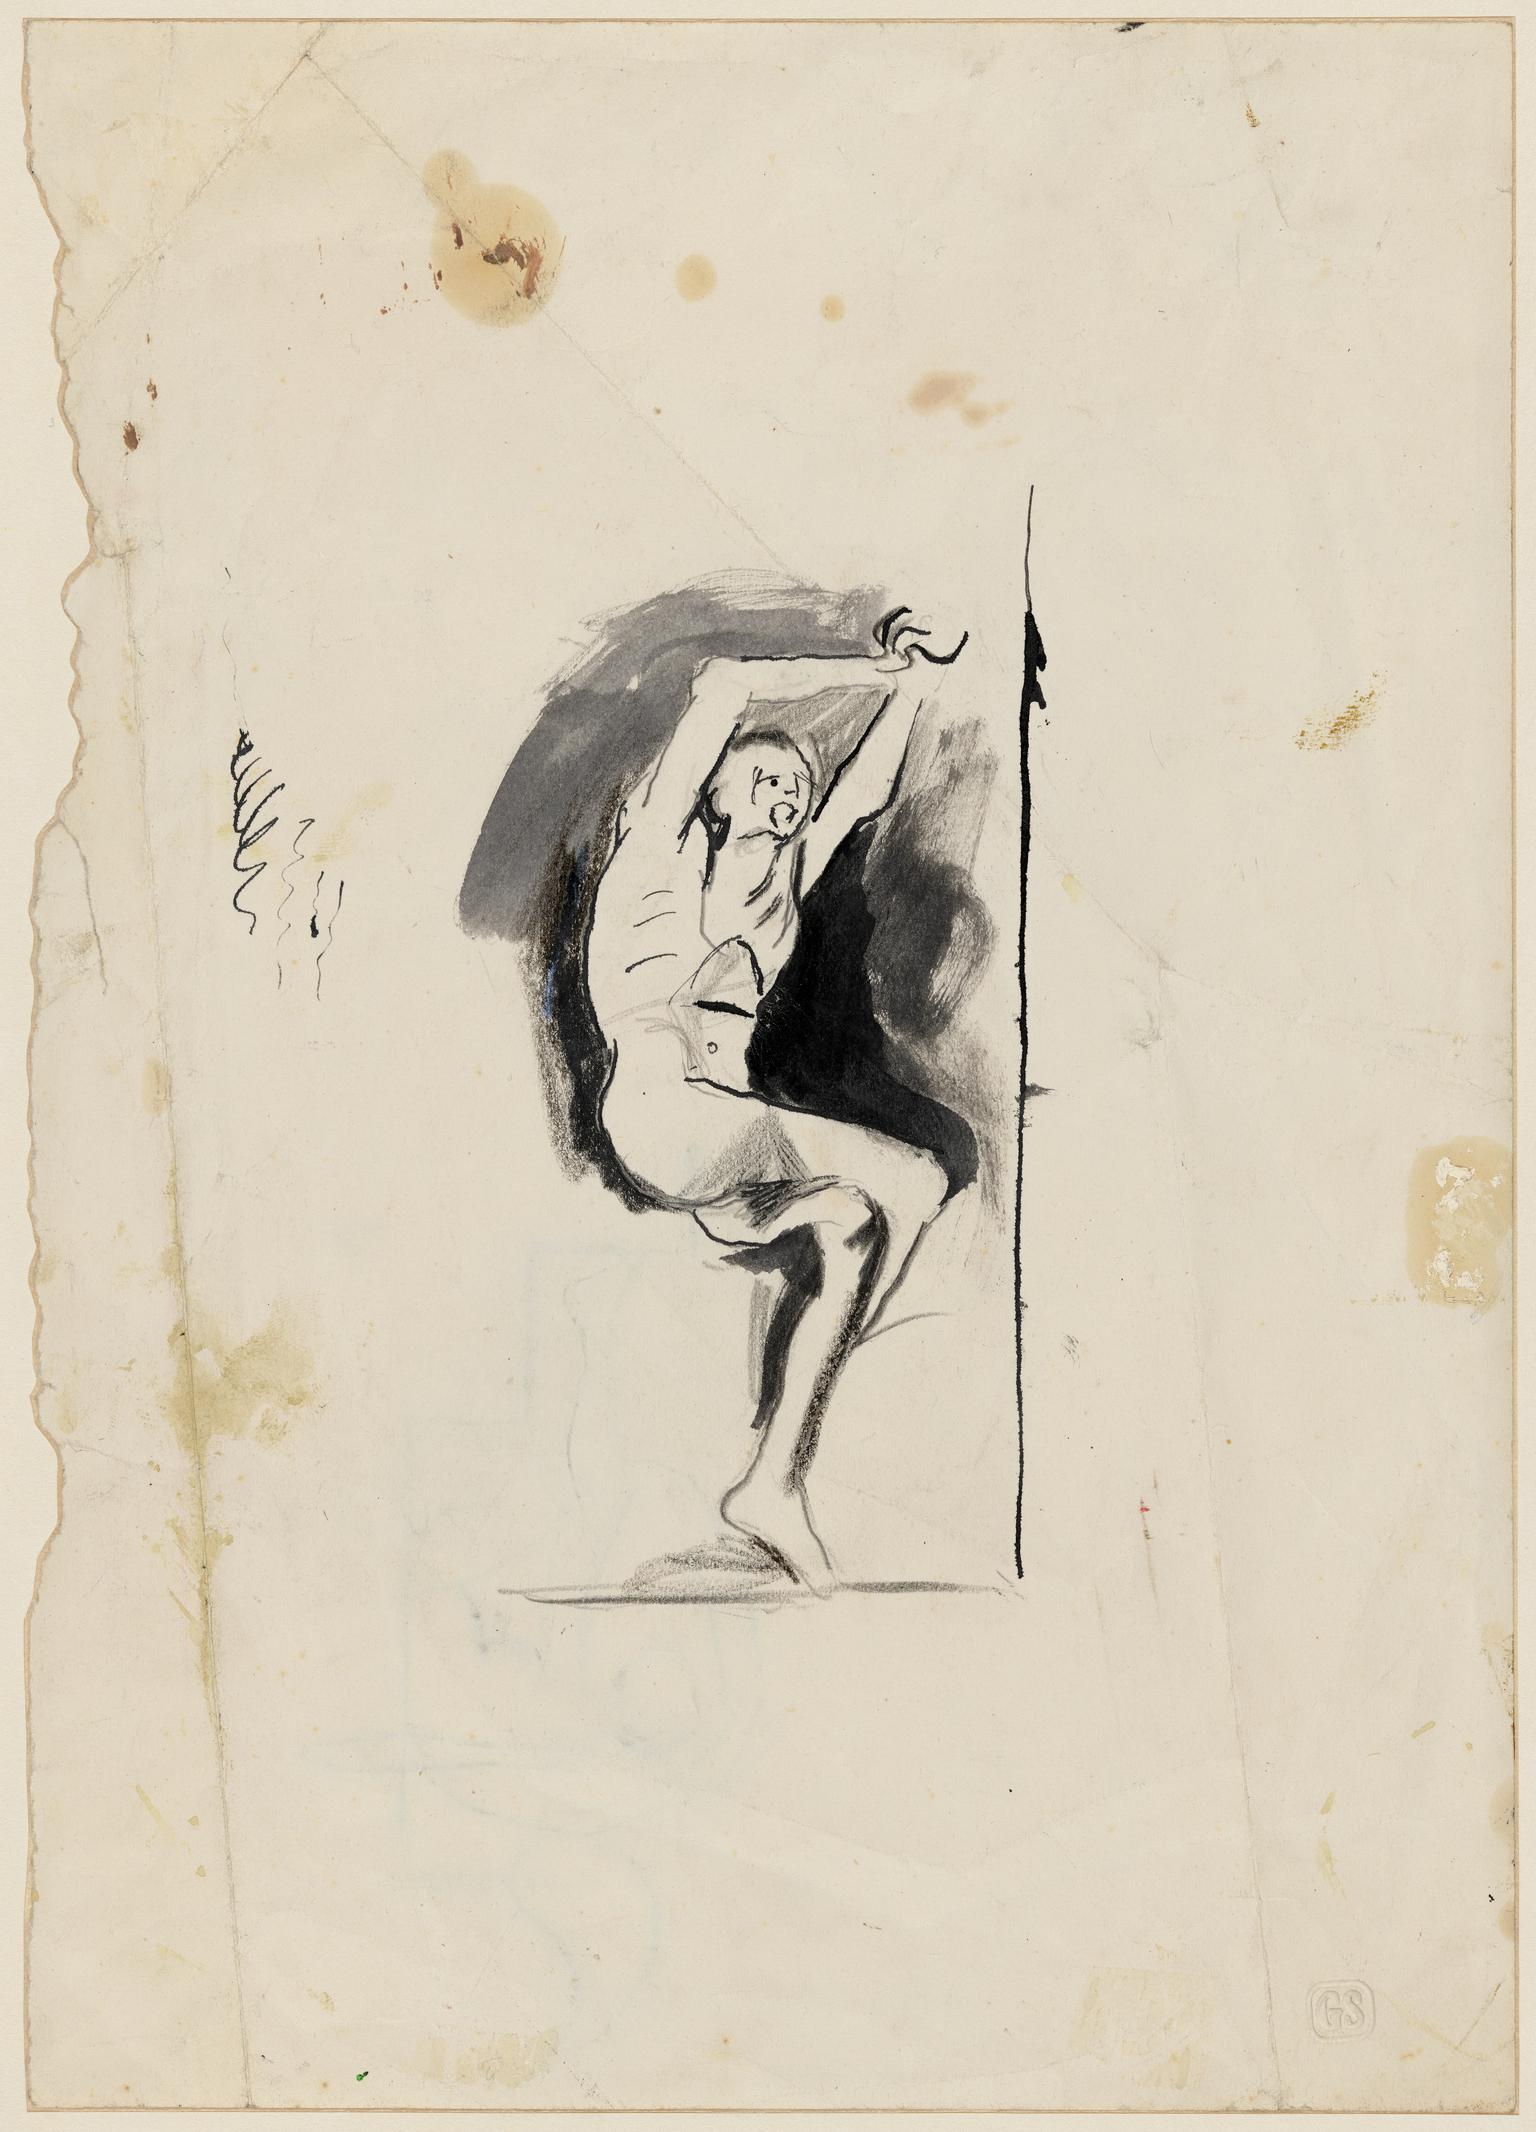 Study of a man with hands raised and tied